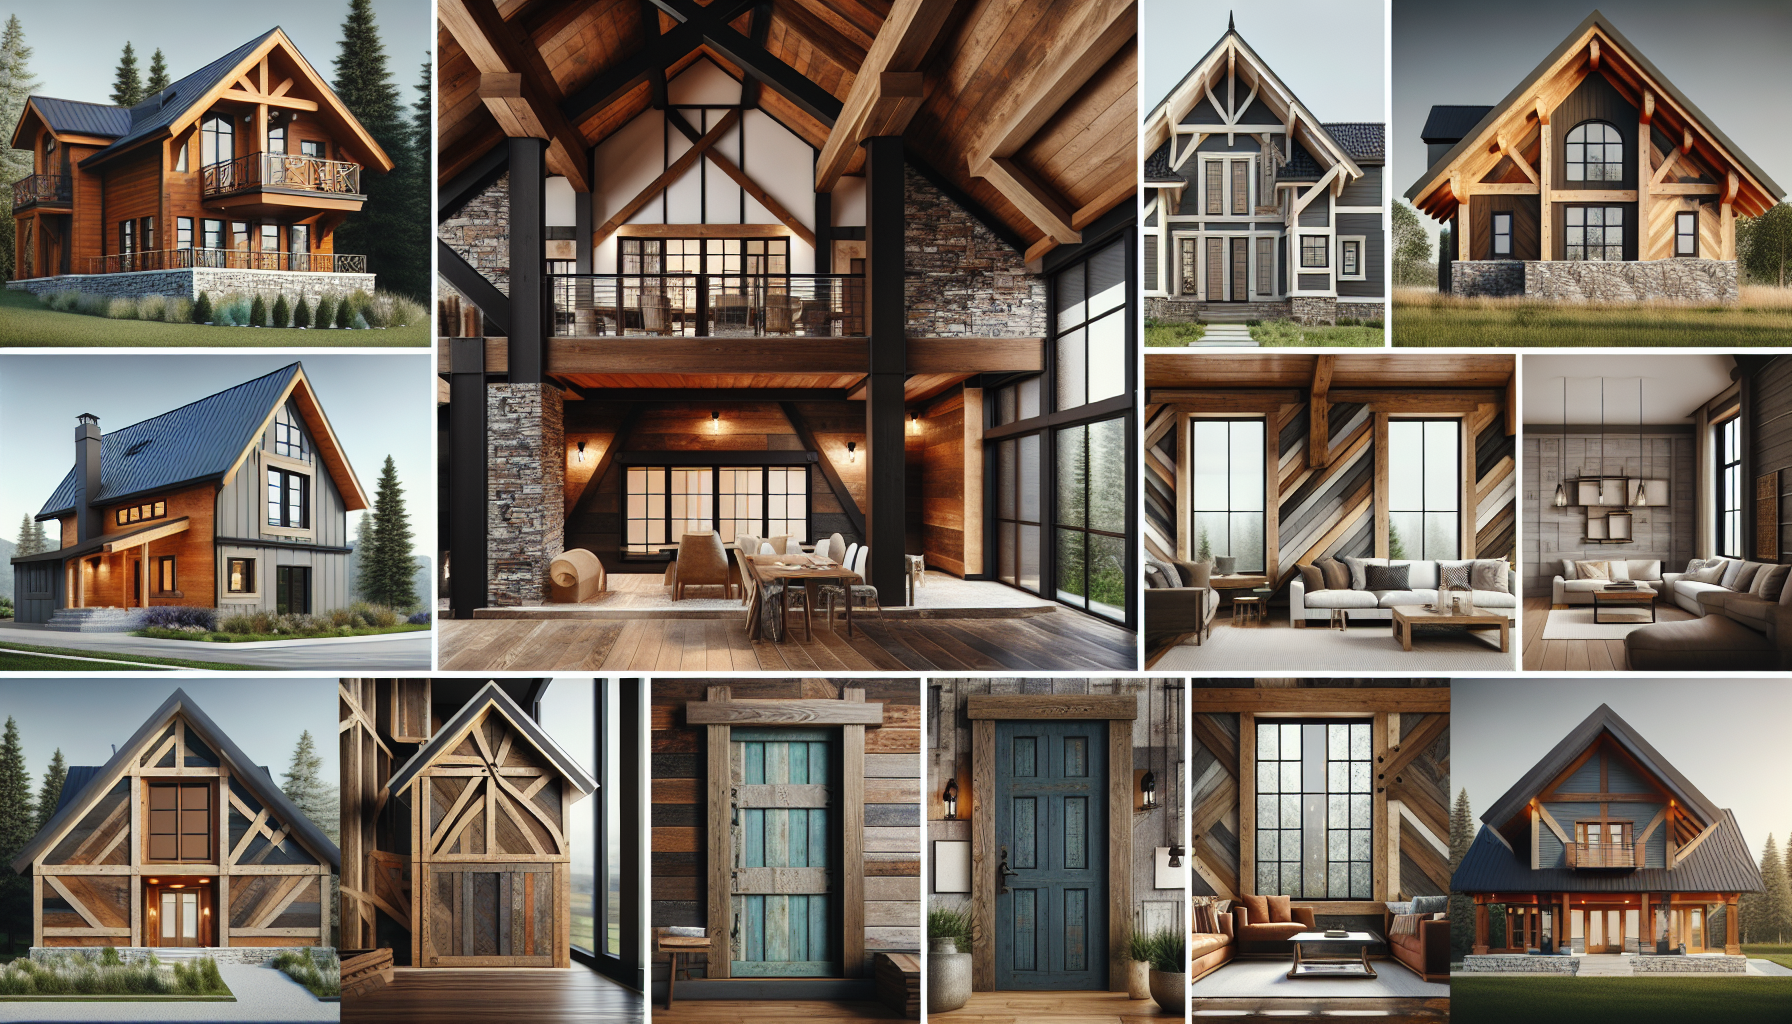 Interior and exterior finishing options for timber frame homes